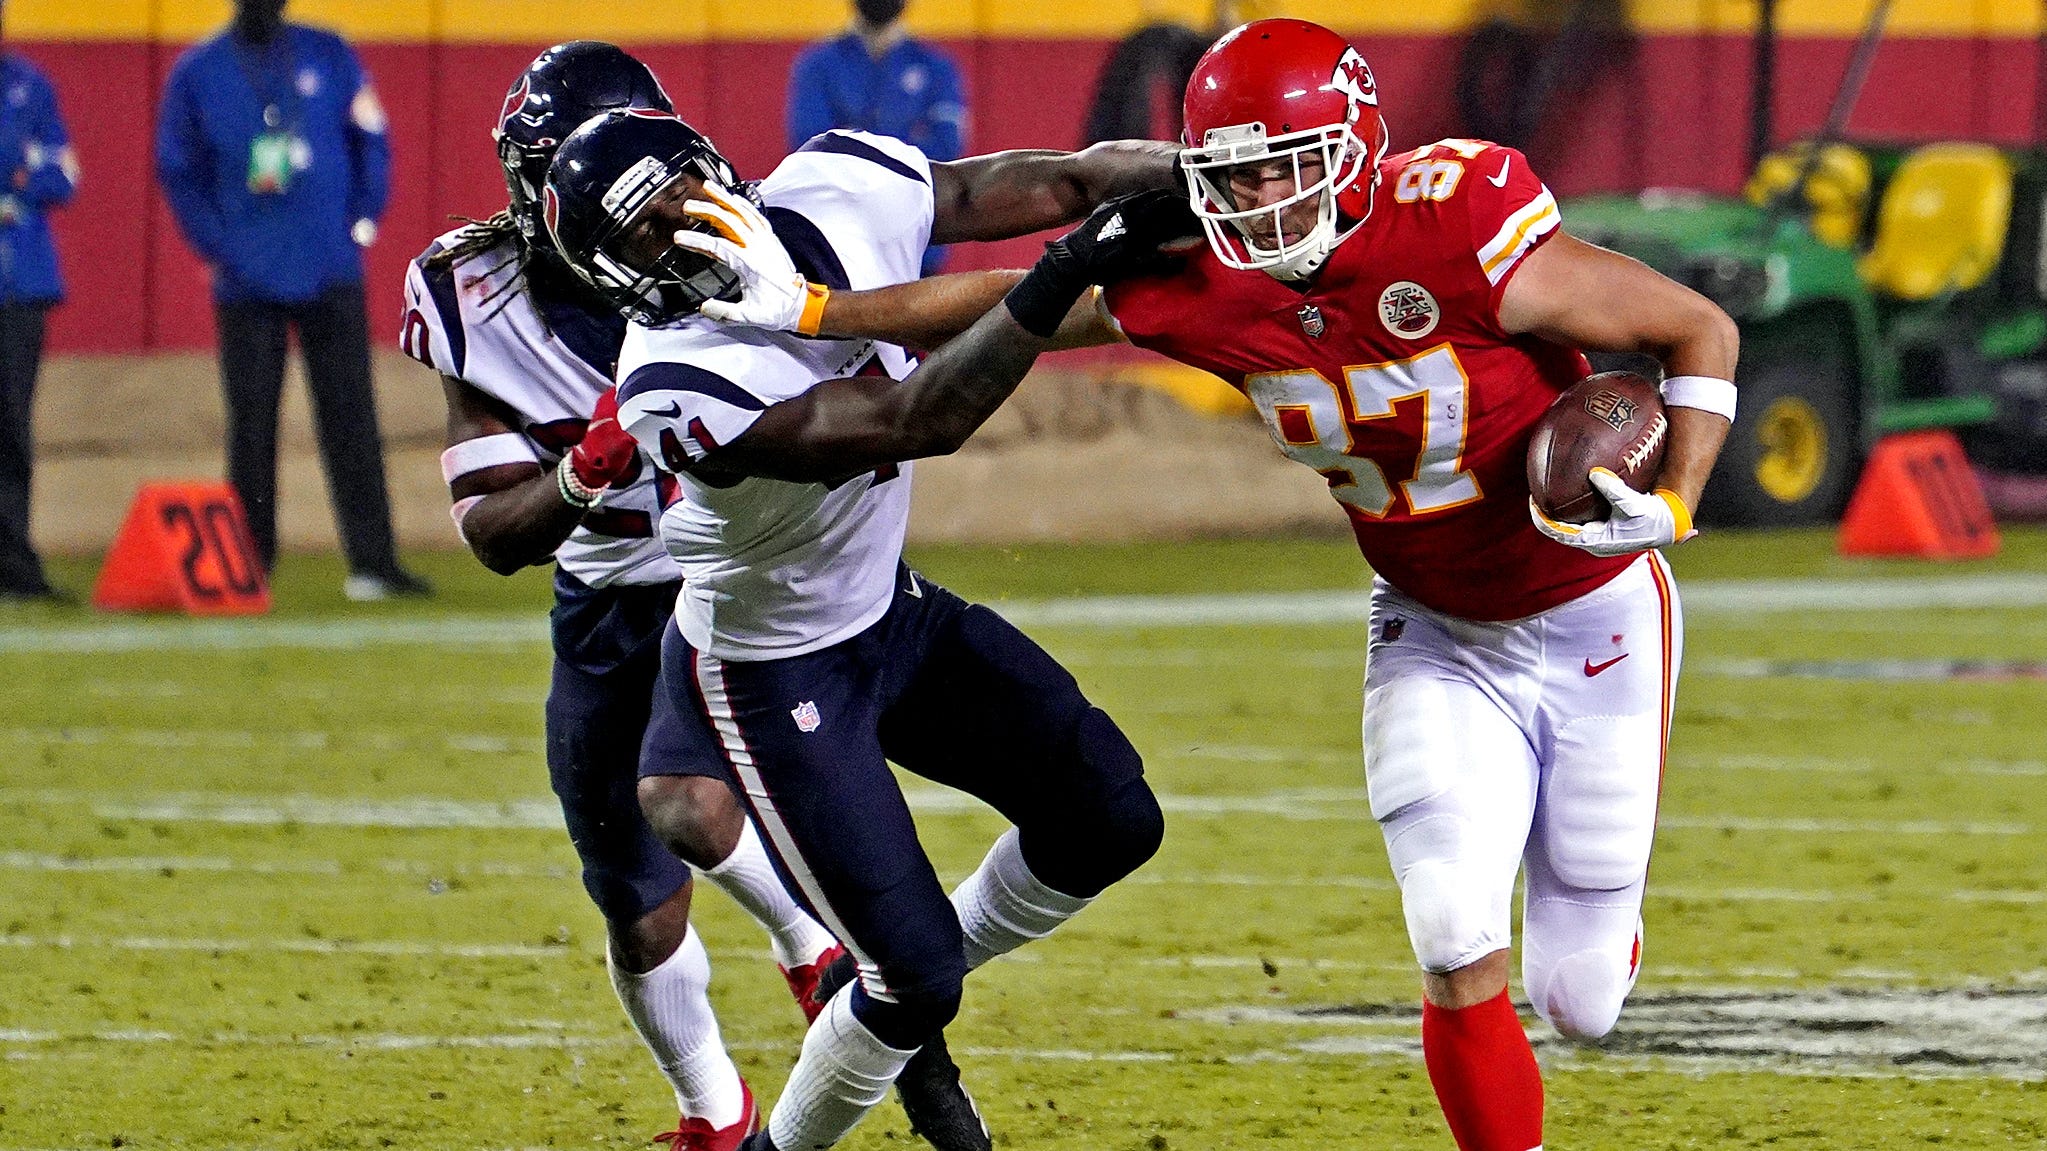 Texans vs. Chiefs: Score, highlights, updates from NFL kickoff game